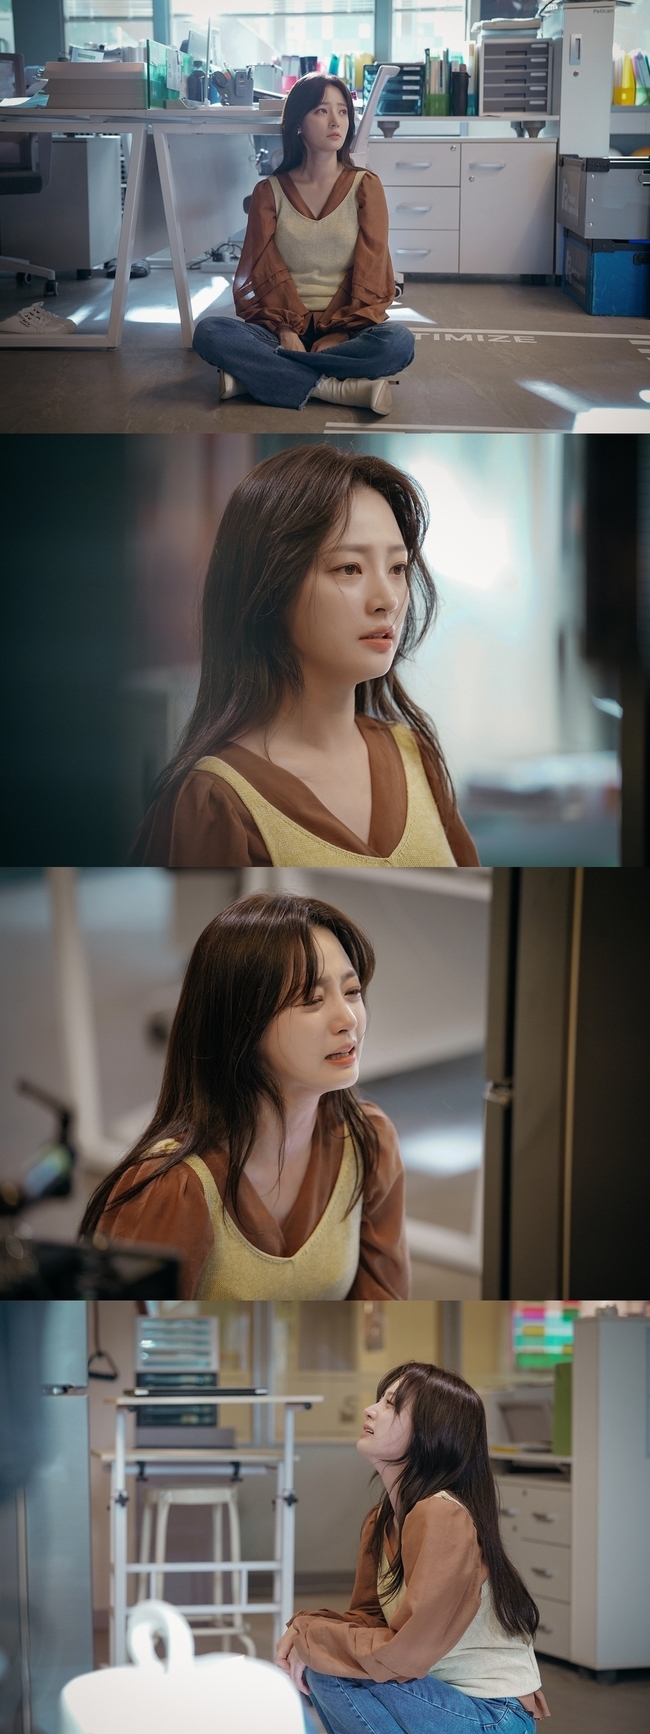 Actor Song Ha-yoon presents the Five-Year Acting.MBC Everlon drama Please Dont Meet That Man (played by Song Pyeon/directed by Oh Mi-kyung), which was first broadcast on November 10, is an absolute sympathy thrilling love comedy of women who have a stethoscope to screen out the Man Who Should Not Meet.Fresh genre, reality sympathy story, personality-perfect actors, and plump production combined to bring hot reaction from the first broadcast.Among them, the presence of Song Ha-yoon (played by Seo Ji Sung), the main character who led the drama, was outstanding.In the first episode of Please Dont Meet The Man, the main character, Ji Sung, who does his best in work and love, one day faced an artificial intelligence refrigerator with a Cho Sang-shin and learned the shocking truth of the prospective groom who is about to marry him.Song Ha-yoon has raised the immersion of the drama with the appeal of the patented luscious charm and the act that causes the sympathy of many female viewers.Meanwhile, on November 17, the production team is concentrating attention on the appearance of Ji Sung, who is tearing tears.In the open photo, Ji Sung is sitting in front of the ancestor god Refrigerator, who shook his life at a moment.Other photos show the figure of Ji Sung, who bursts into tears in front of his ancestor, Reprigerator.The tears flowing without any hesitation, the acting power of Actor Song Ha-yoon, who expresses the feelings of Character with impact, steals the gaze.In the play, Ji Sung was about to marry a lover who had been in love for seven years, but the truth of the lover that his ancestor, Refrigerator, told him was a shock.Ji Sung secretly captured the image of Ji Sung in CCTV and uploaded it to a group chat room with friends. It was like a conversation that evaluated the face and body of Ji Sung.The heart of Seo Ji Sung is inevitably collapsed.In the second episode on the 17th, Ji Sung pours tears in front of the ancestor, the Refrigerator, who shook his life.Song Ha-yoon has filled the tears of complicated feelings such as sadness, anger, regret, and betrayal felt by Seo Ji Sung.Ive watched Song Ha-yoons Tears Acting with a breathtaking production, and Im asking for your attention and expectation, he said.hwang hye-jin